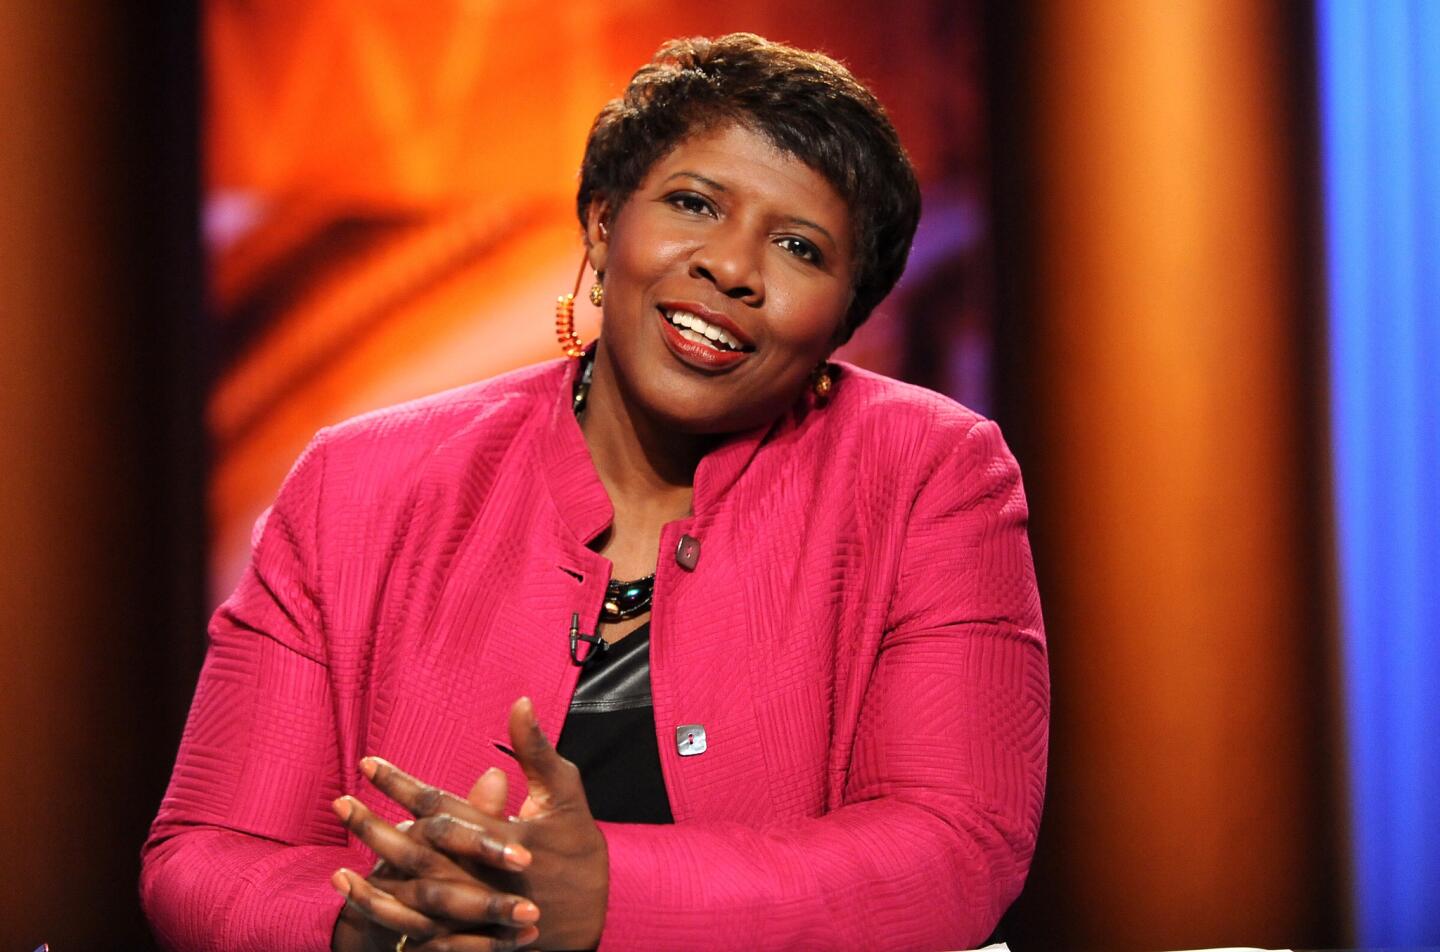 Shown is Gwen Ifill (former Evening Sun employee) in the WETA studios. Photo is to accompany her essay in the Sun Magazine celebrating the 175th anniversary of the newspaper.